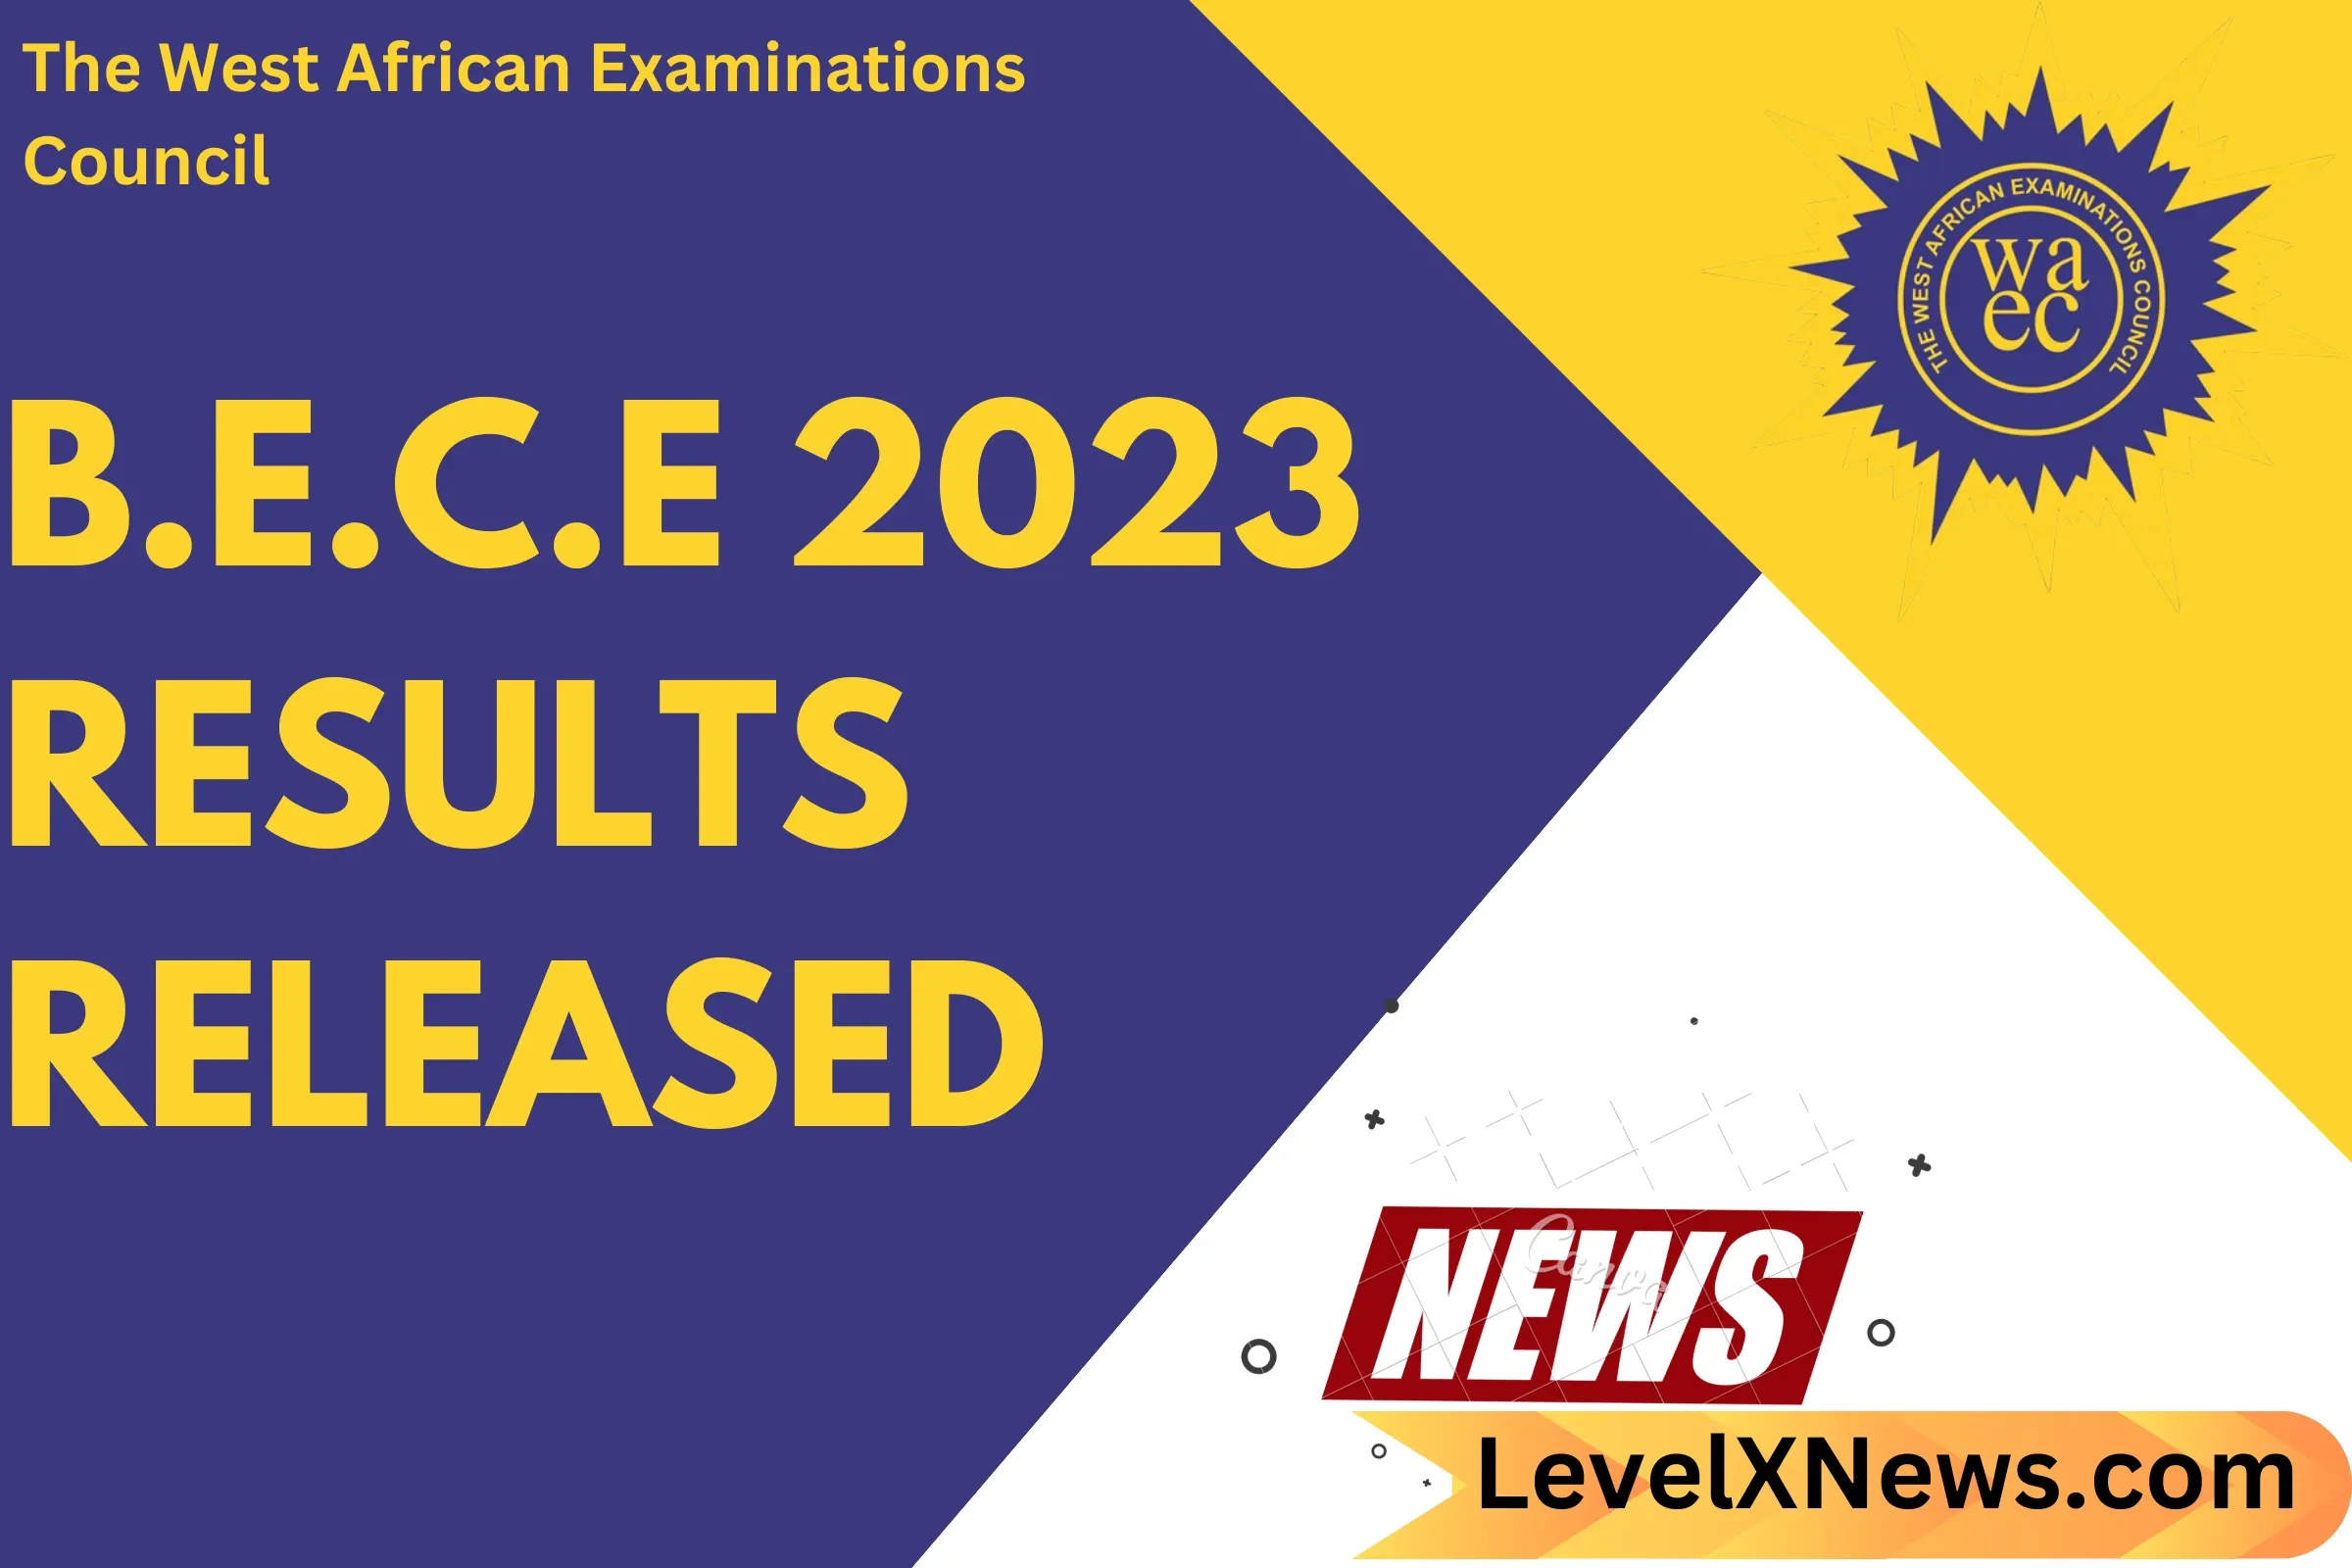 BECE 2023 Results Released by WAEC: How to Check Online